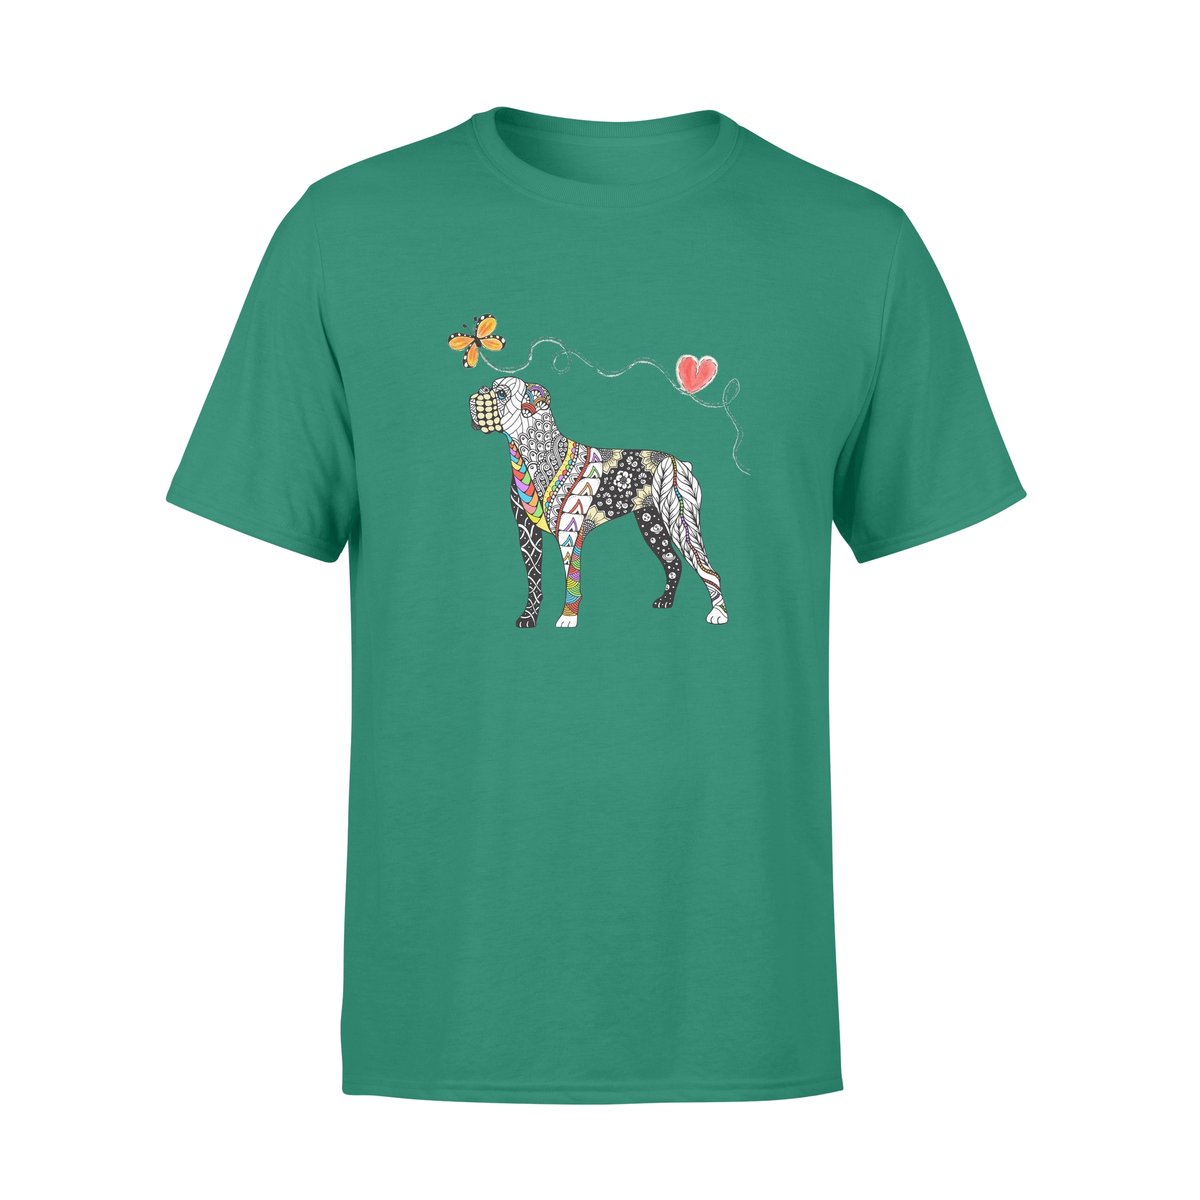 Zentangle Rainbow Boxer – Premium T-Shirt, Gift For Dog Lover, Gift For Bull Terrier Lover T-Shirt Hoodie All Color Size S-5Xl